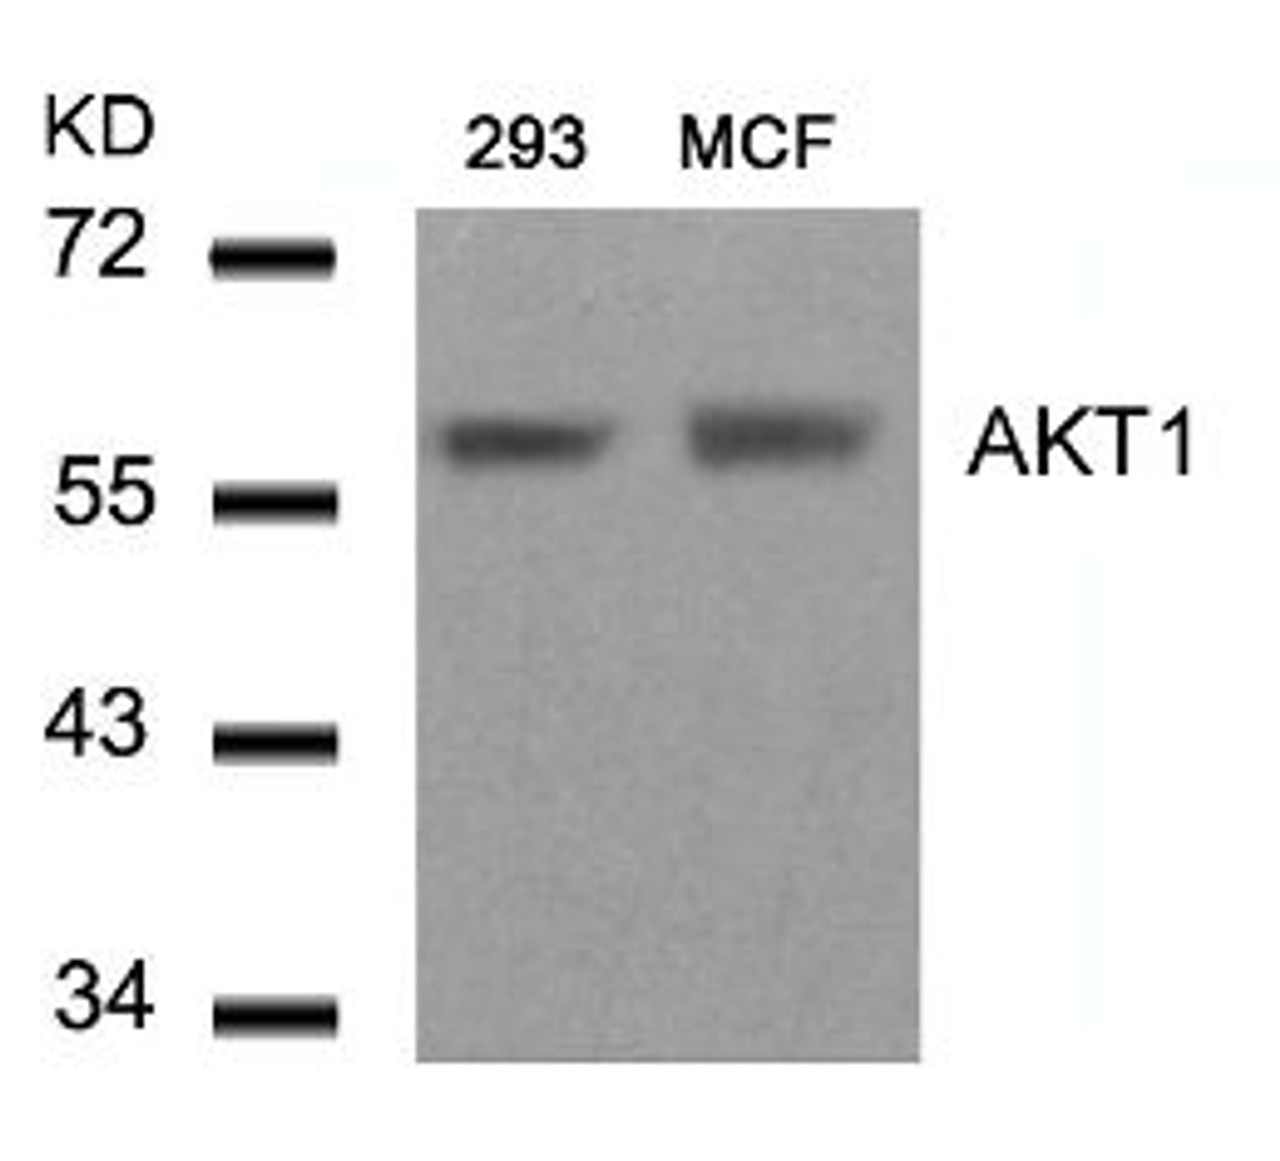 Western blot analysis of lysed extracts from 293 and MCF cells using AKT1 (Ab-450) .